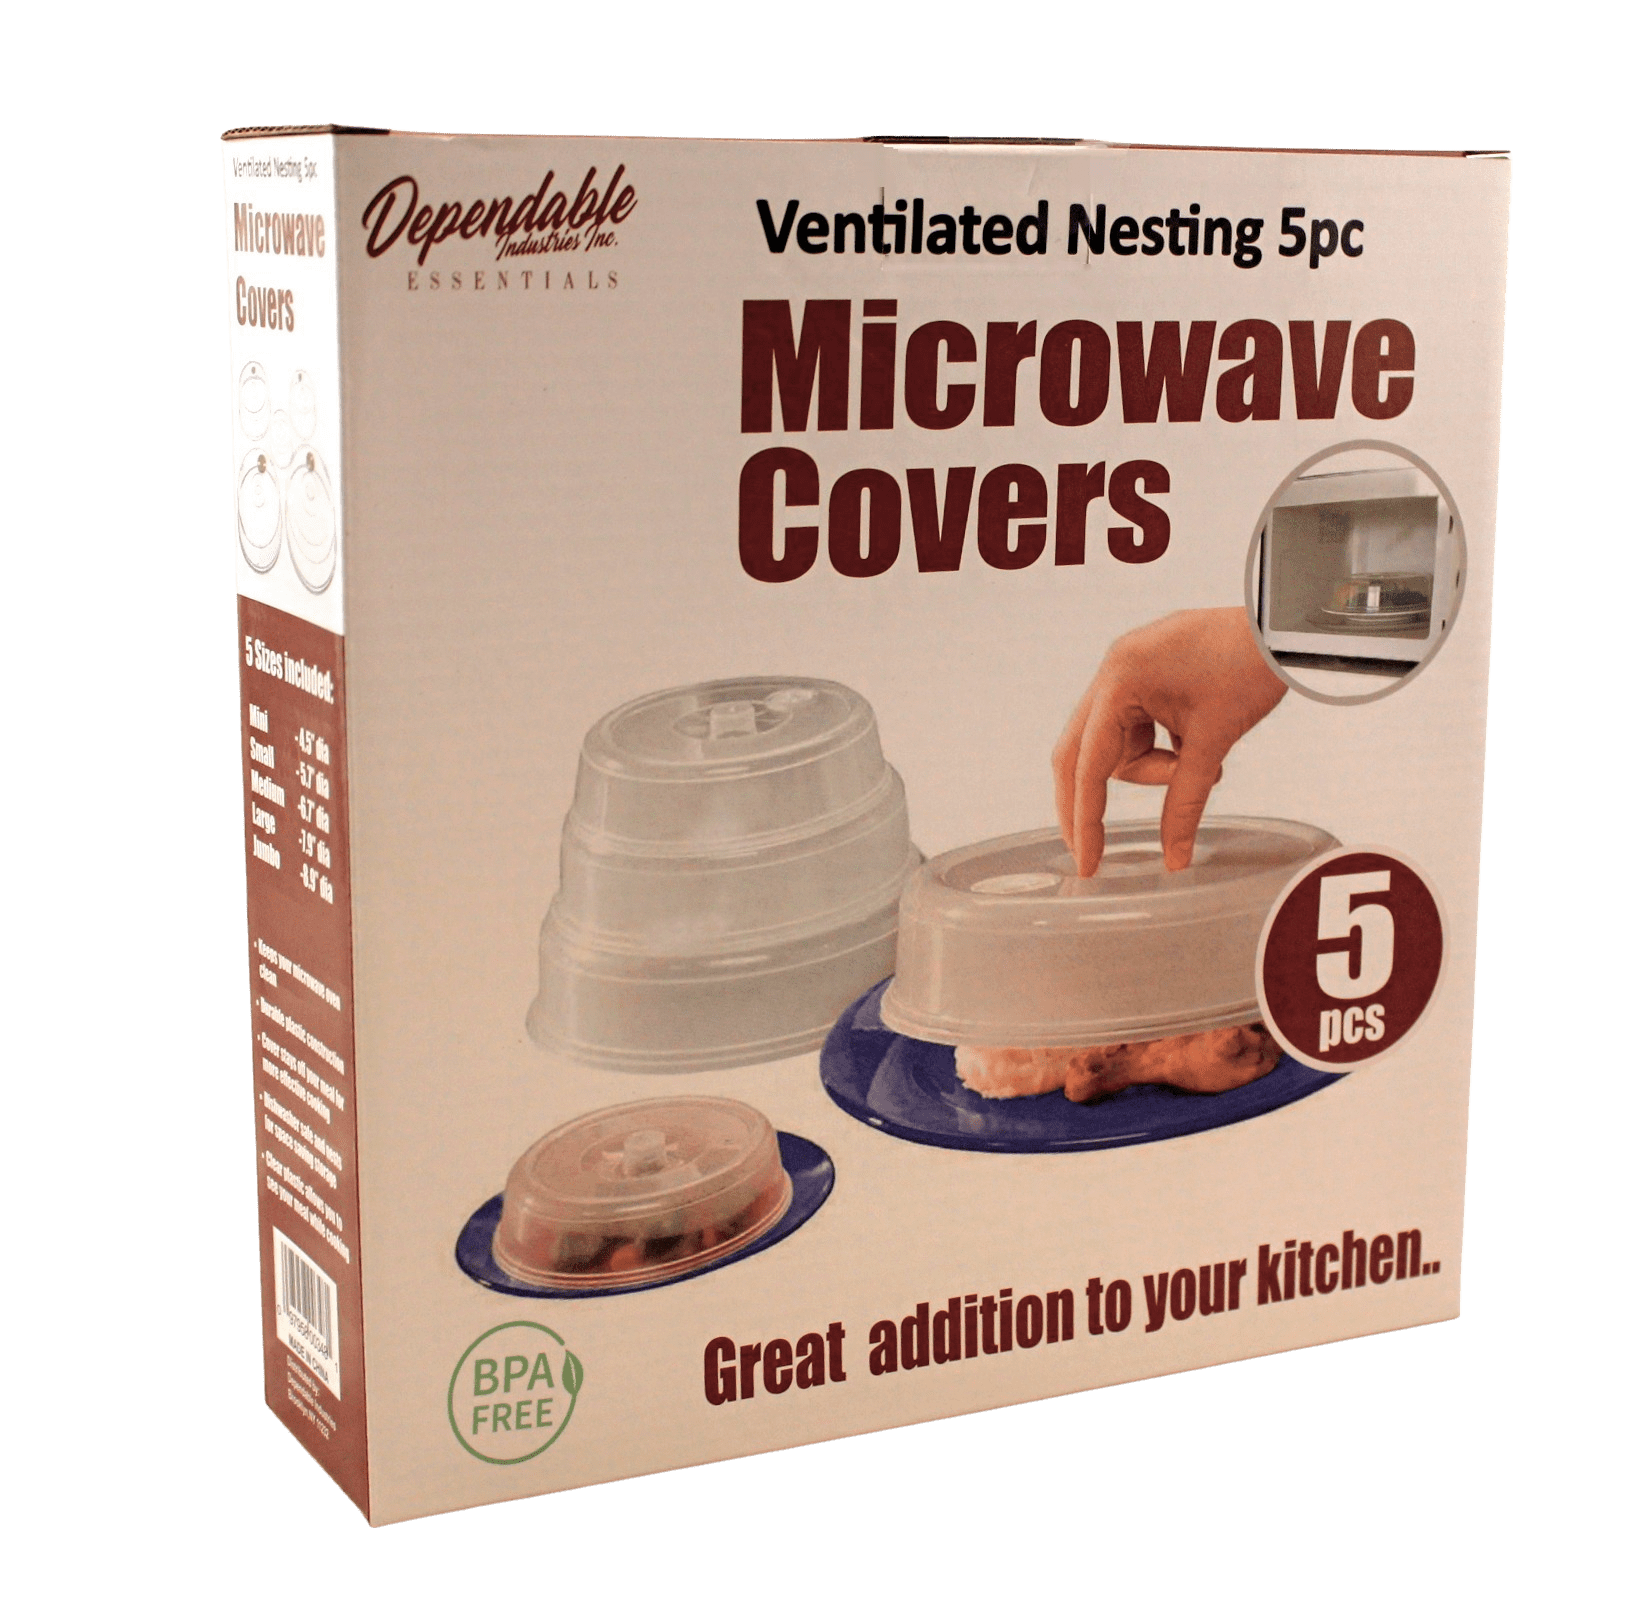 SDJMa 2PCS Microwave Plate Covers with Adjustable Steam Vents; Microwave  Splatter Covers - Mixed Sizes for Large & Small Food Plates Bowls 